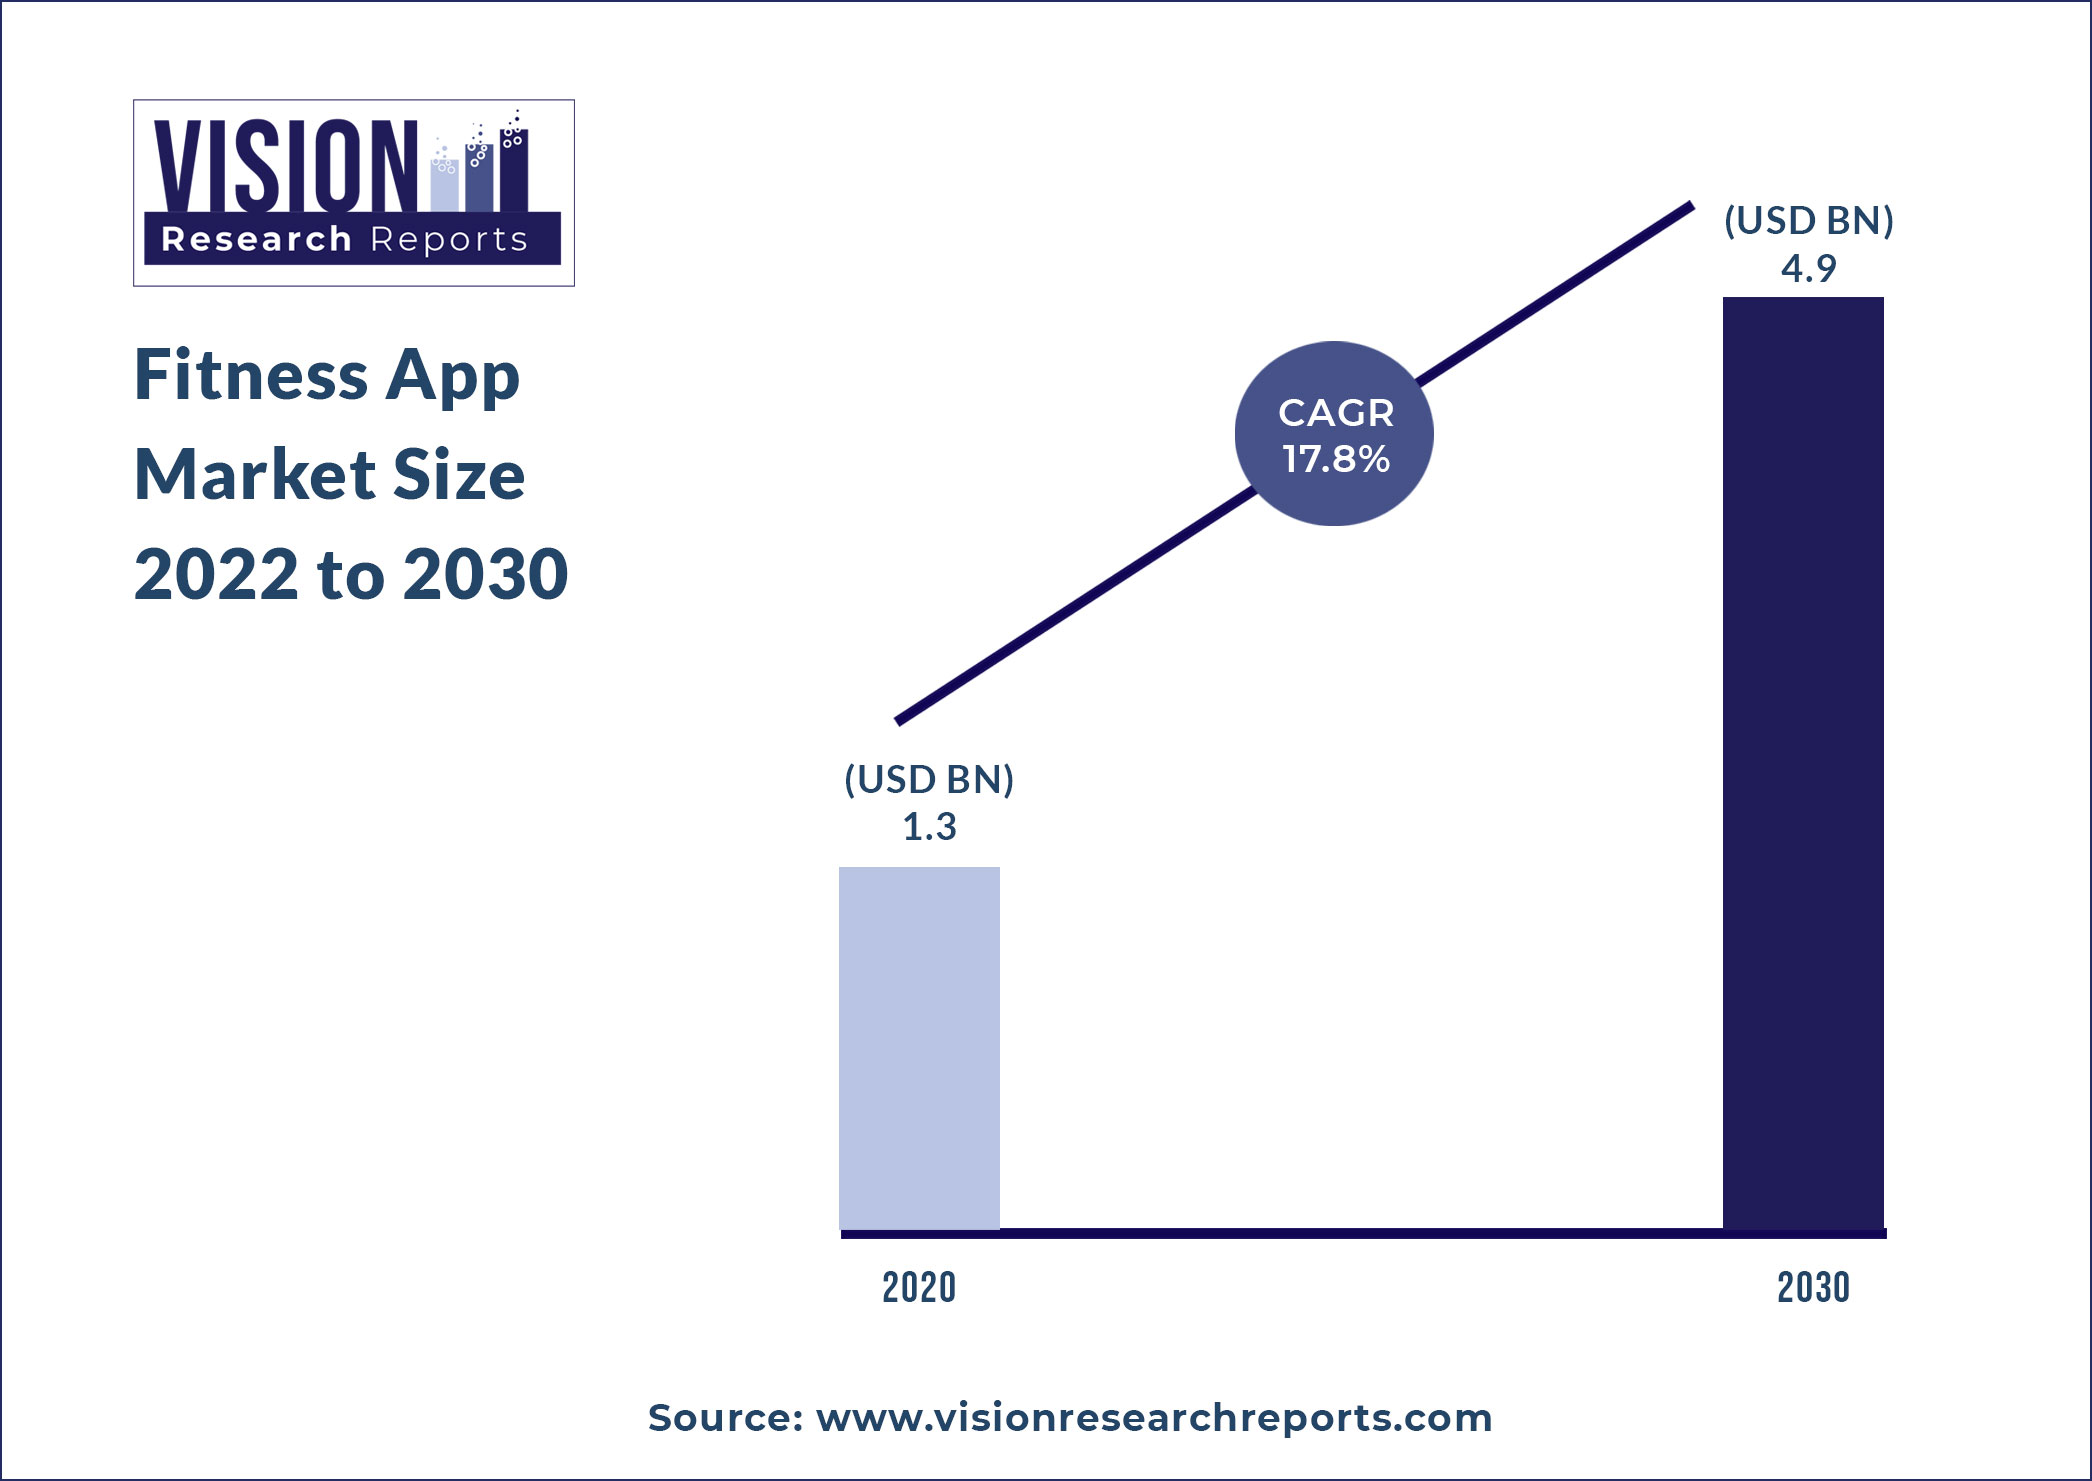 Fitness App Market Size 2022 to 2030